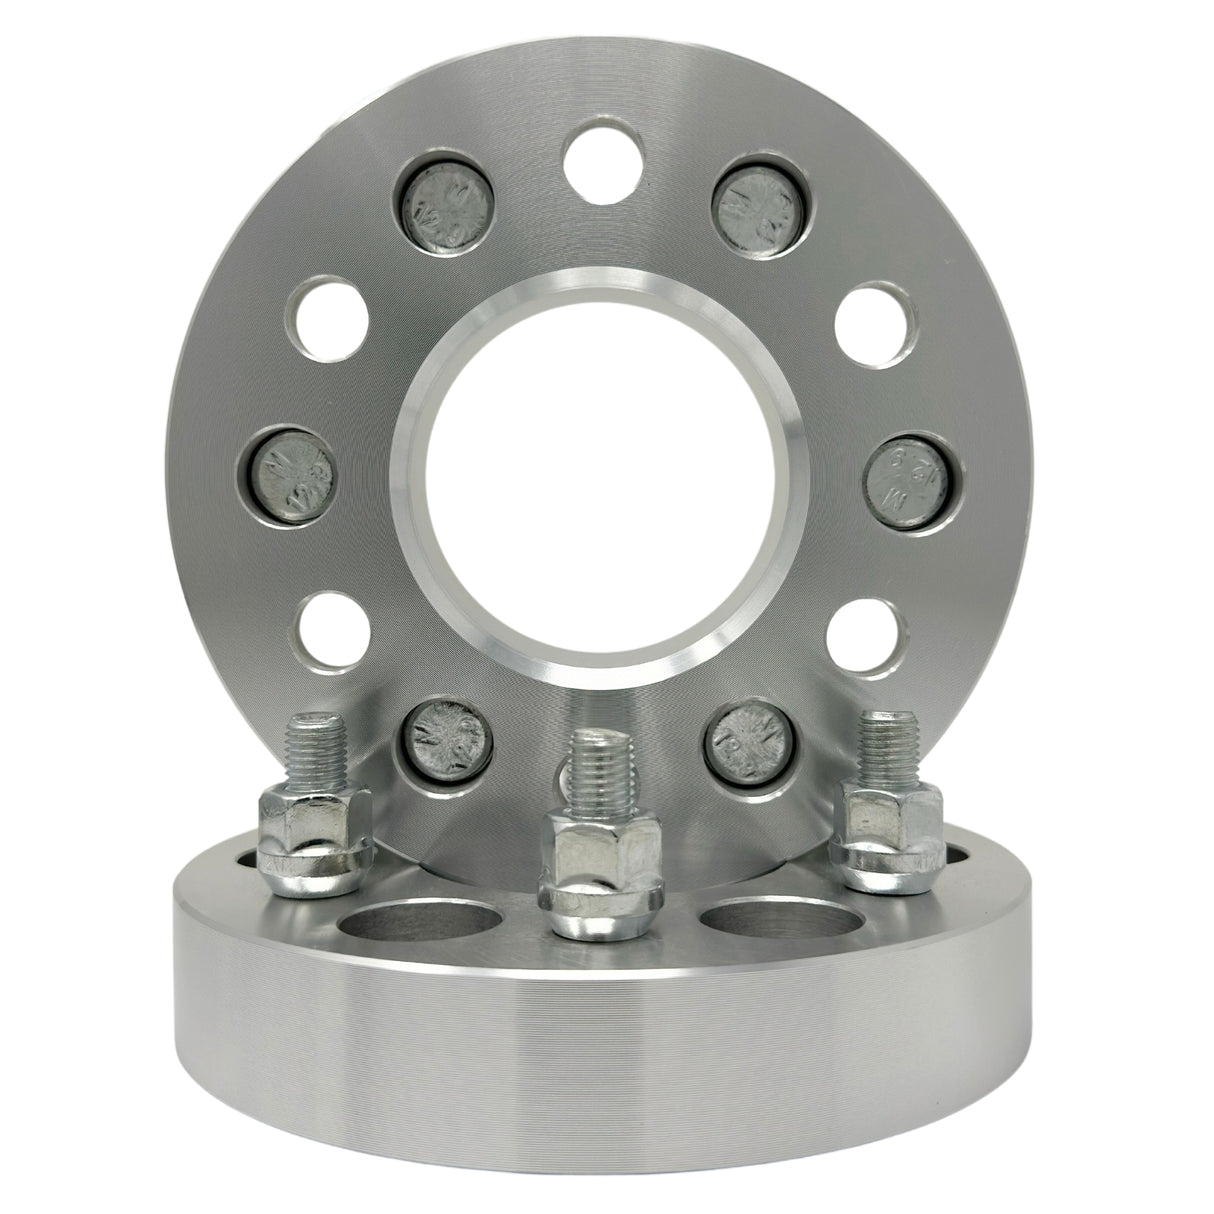 6x5.5 to 6x4.5 Wheel Adapters 1.5" Inch (38mm) 14x1.5 Studs & Lug Nuts 78.1mm Center Bore | 6x139.7 to 6x114.3